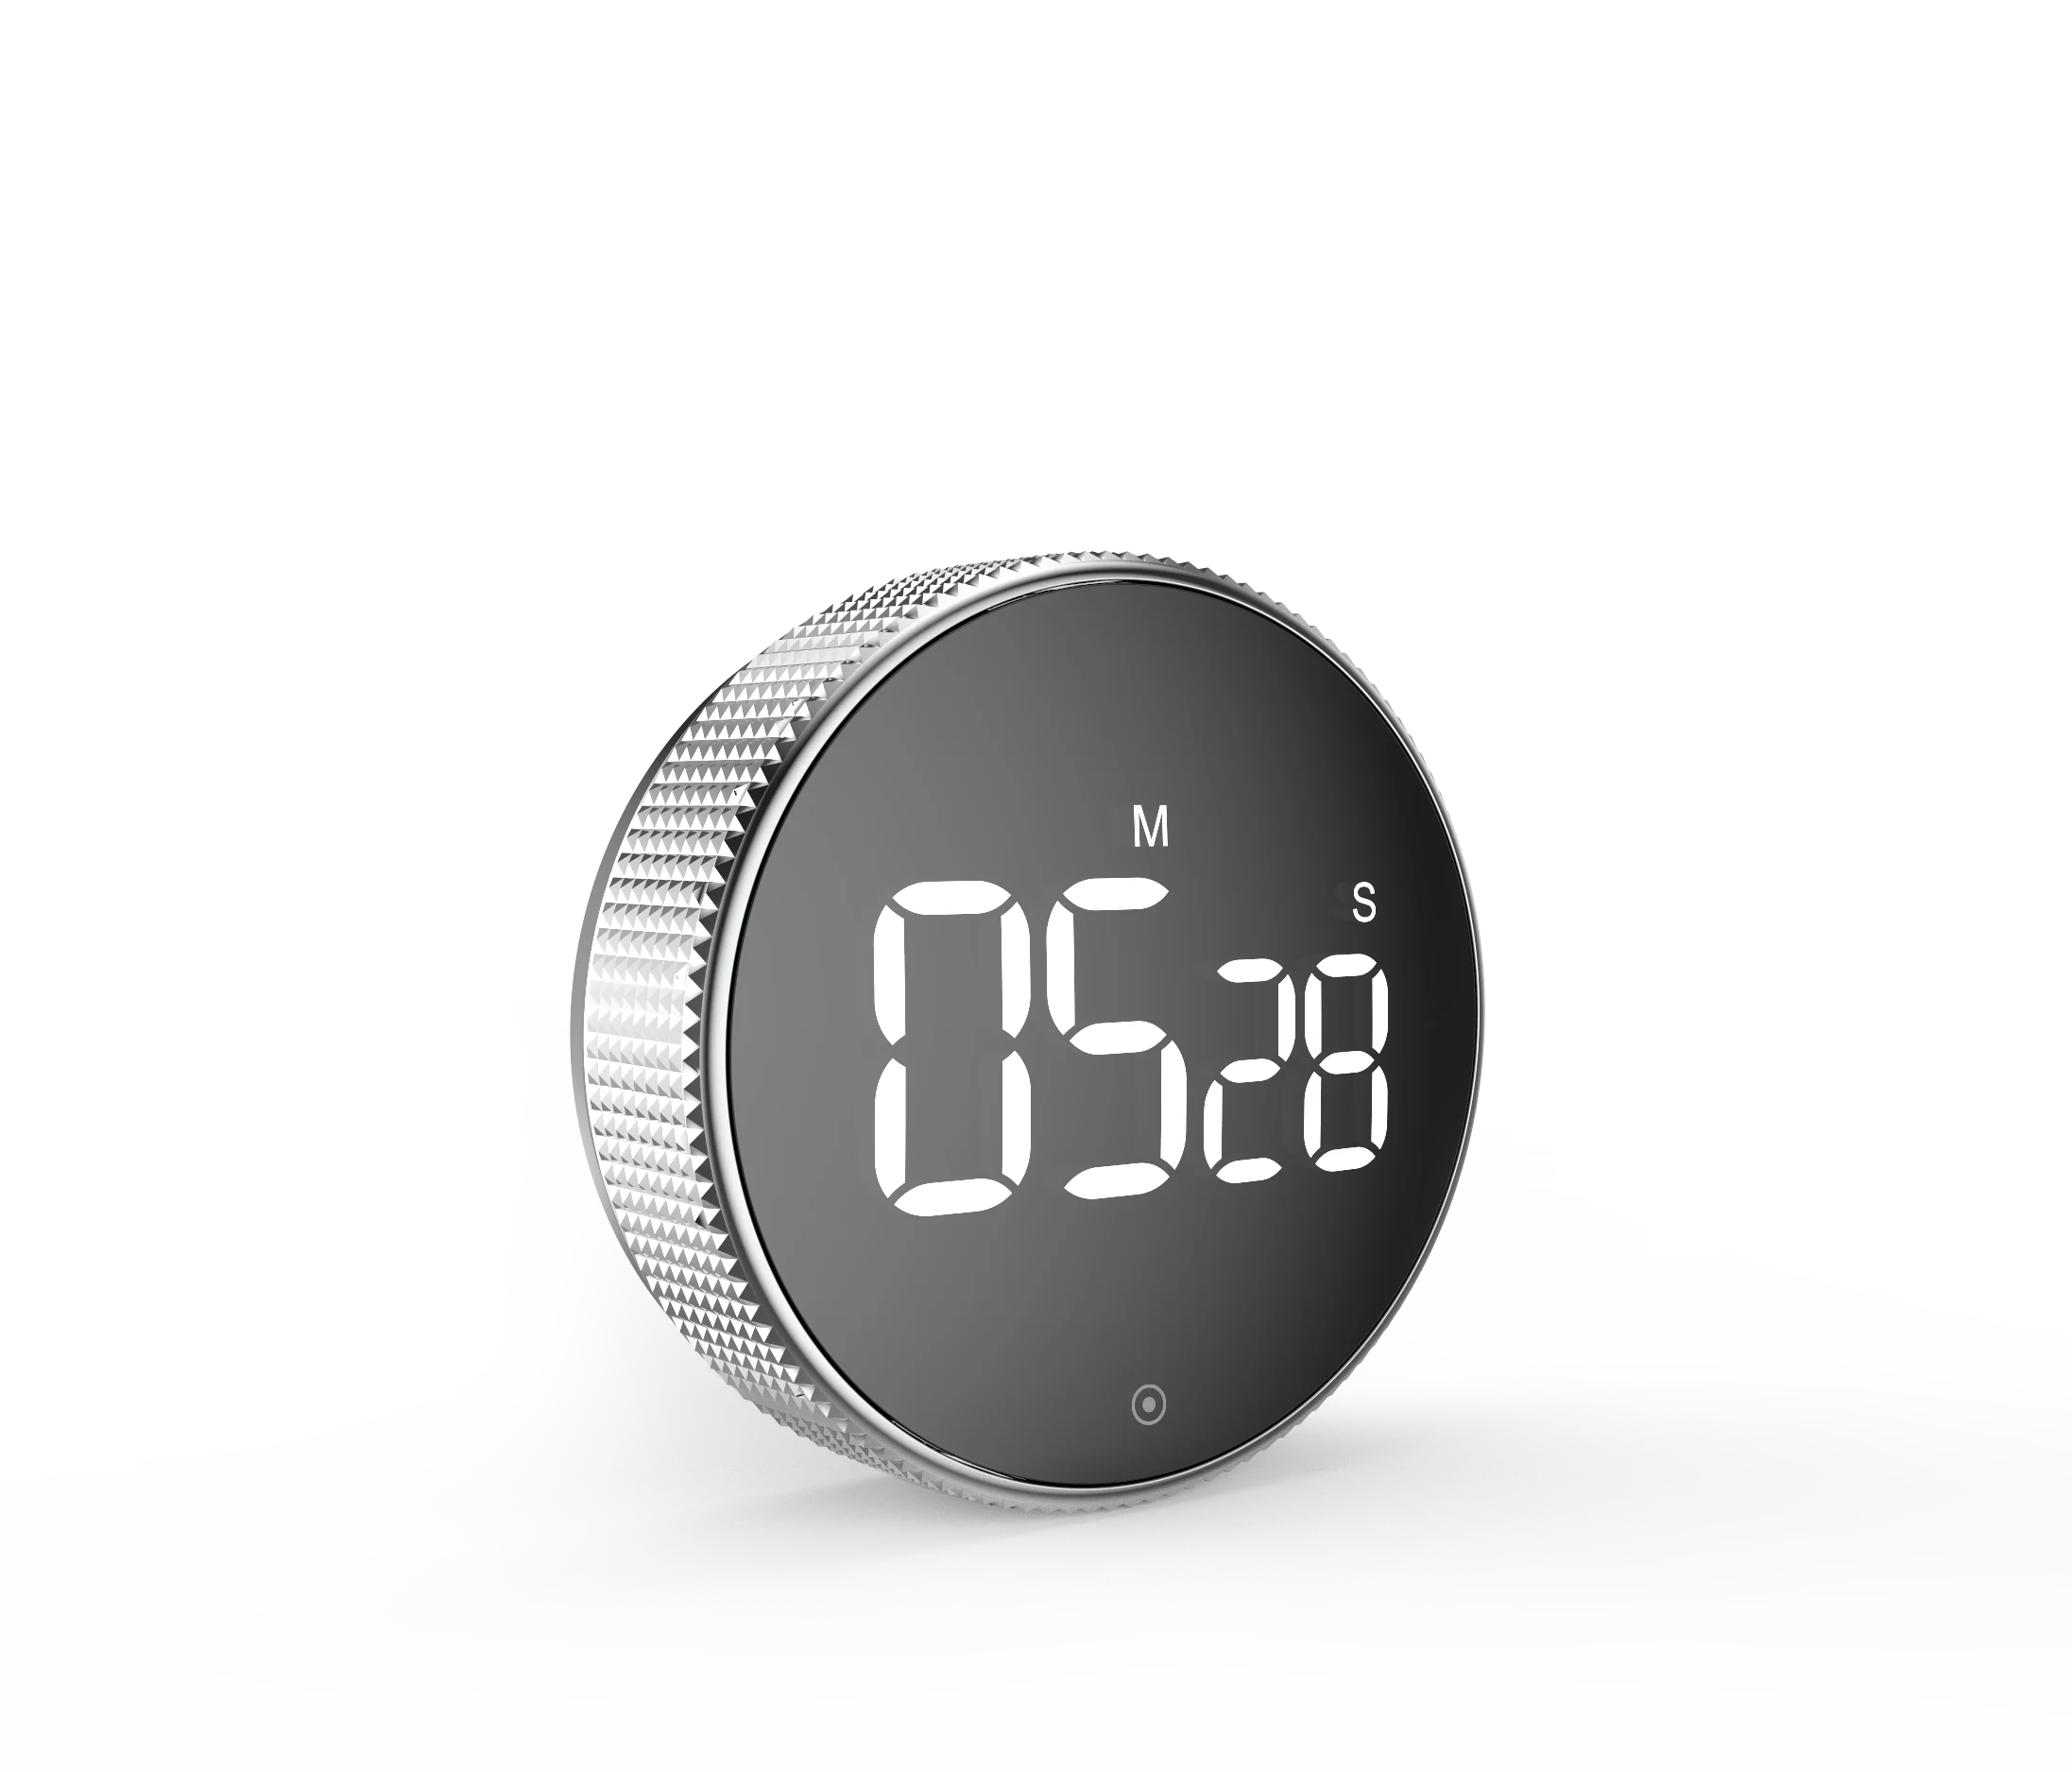 STC Rotary Digital Timer Cooking Kitchen Clock, LED Display, Magnetic